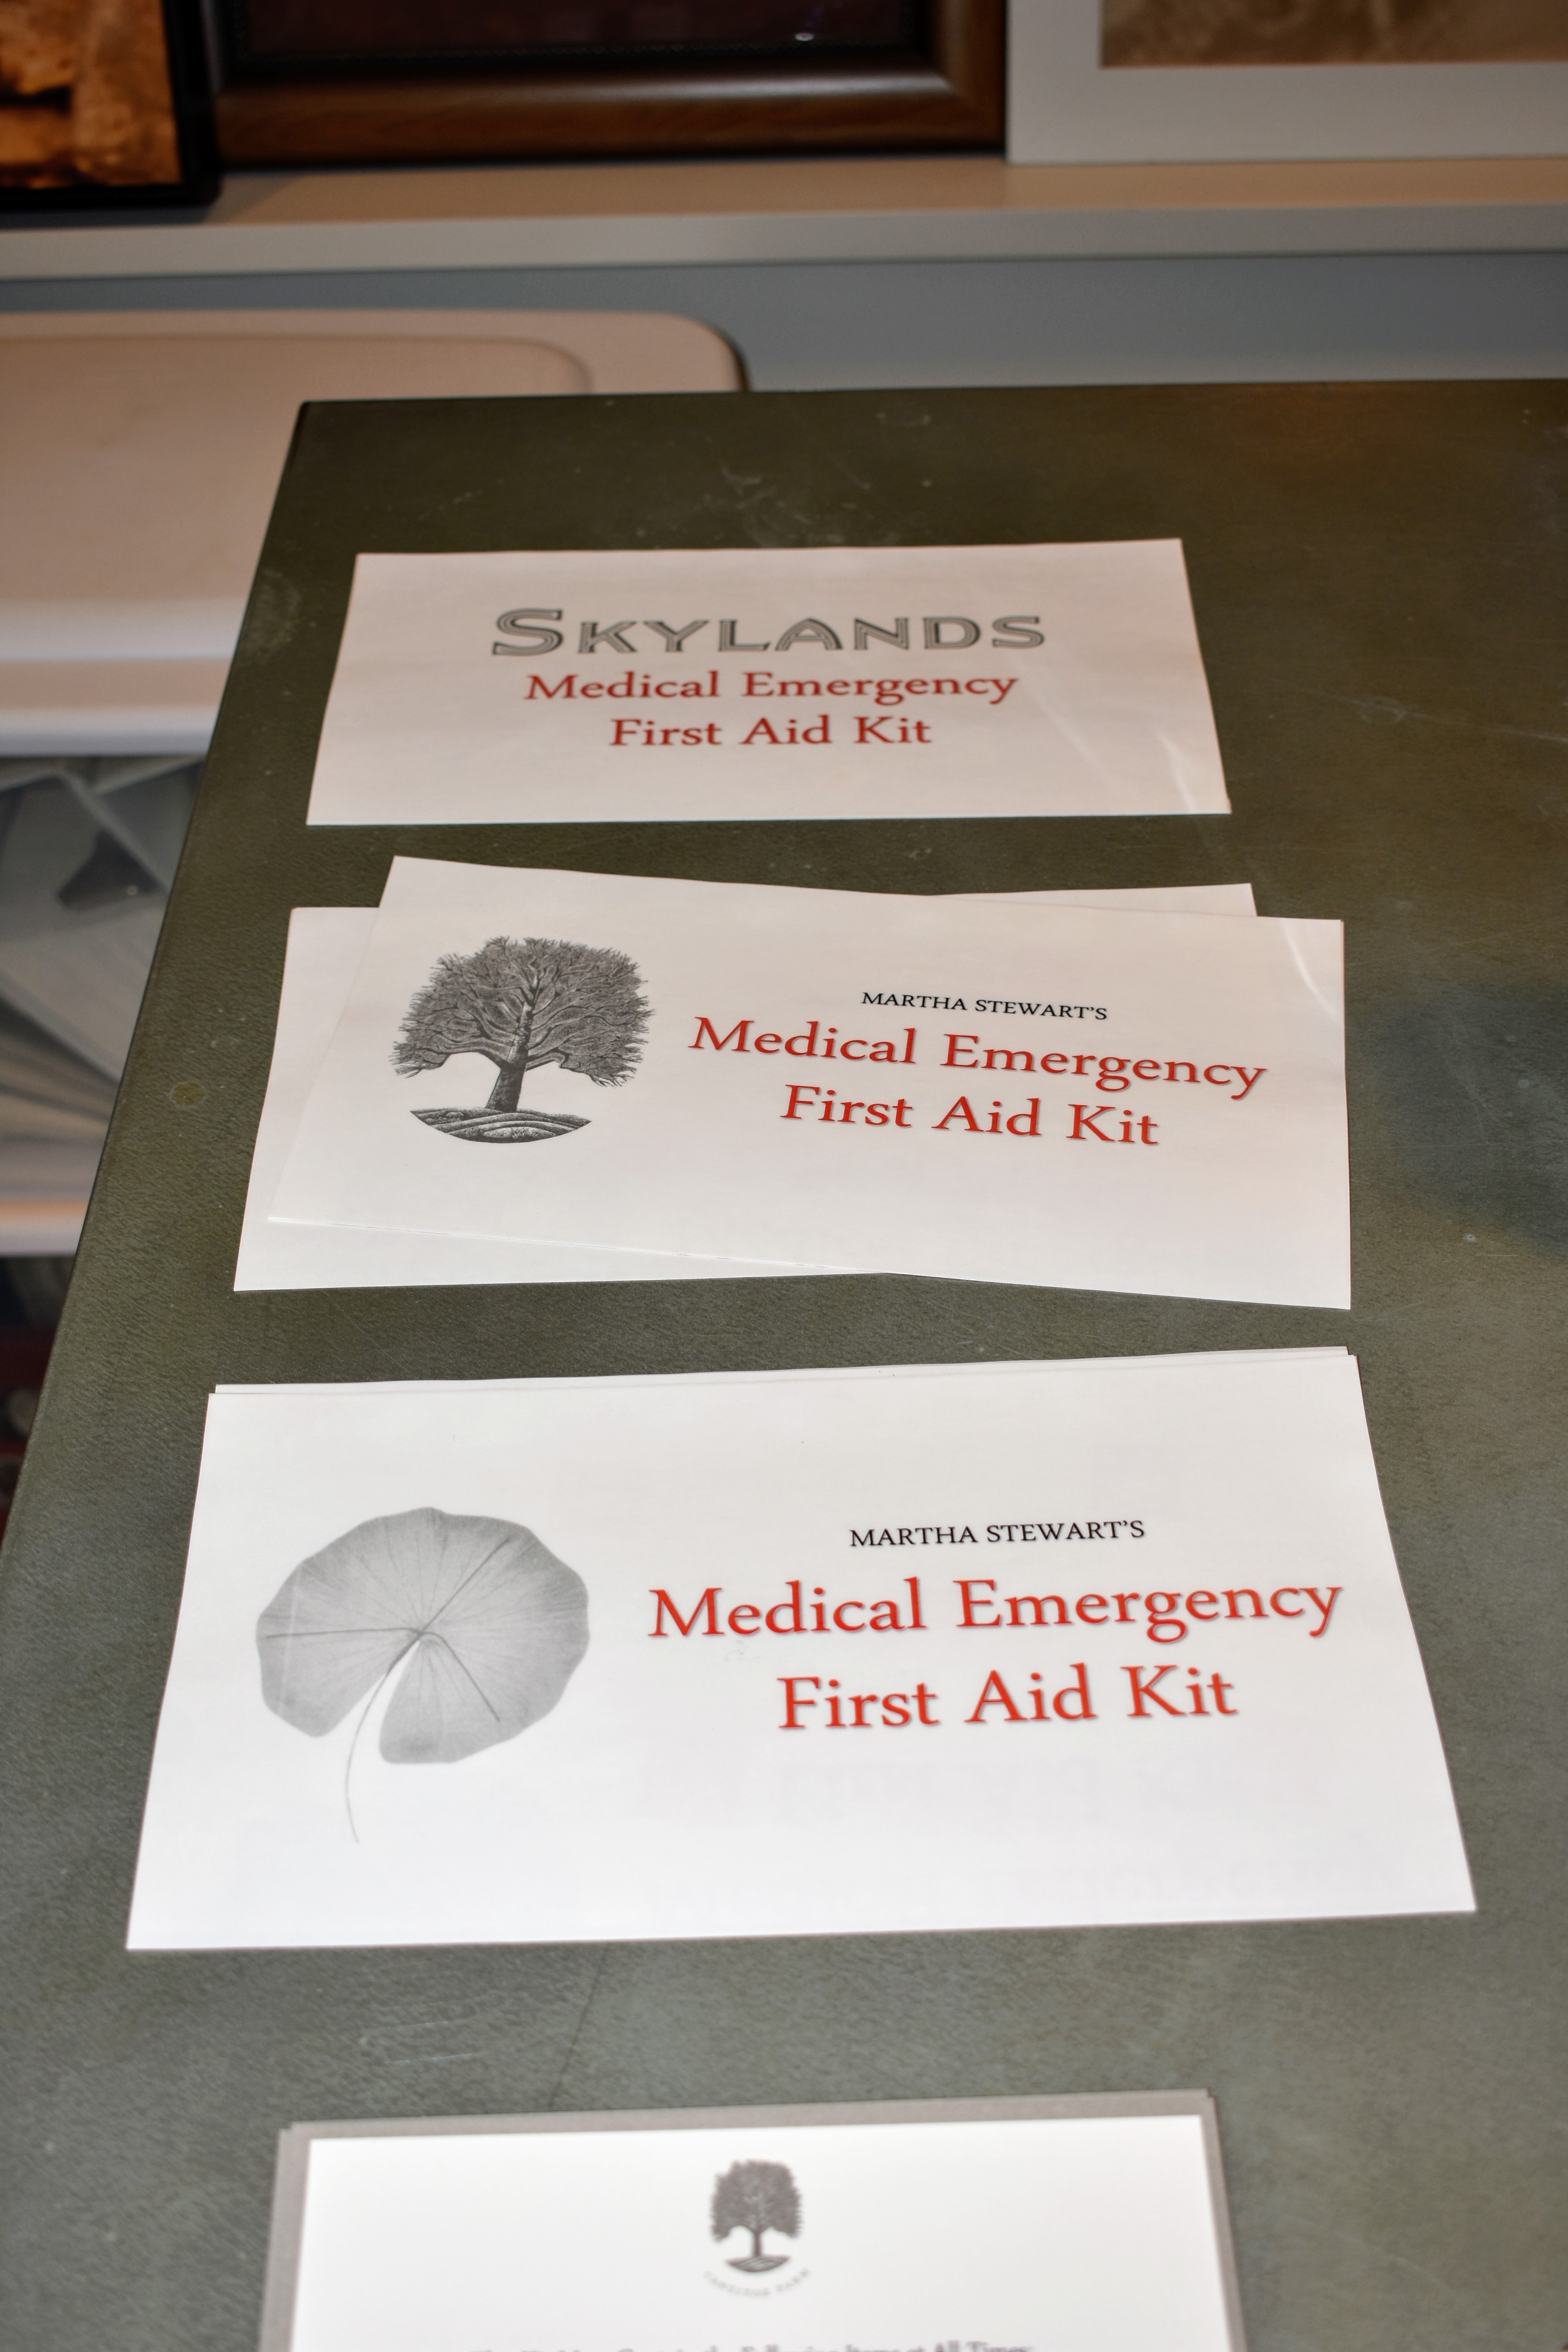 Create A Medicine Organizer & First Aid Kit Center In Your Home